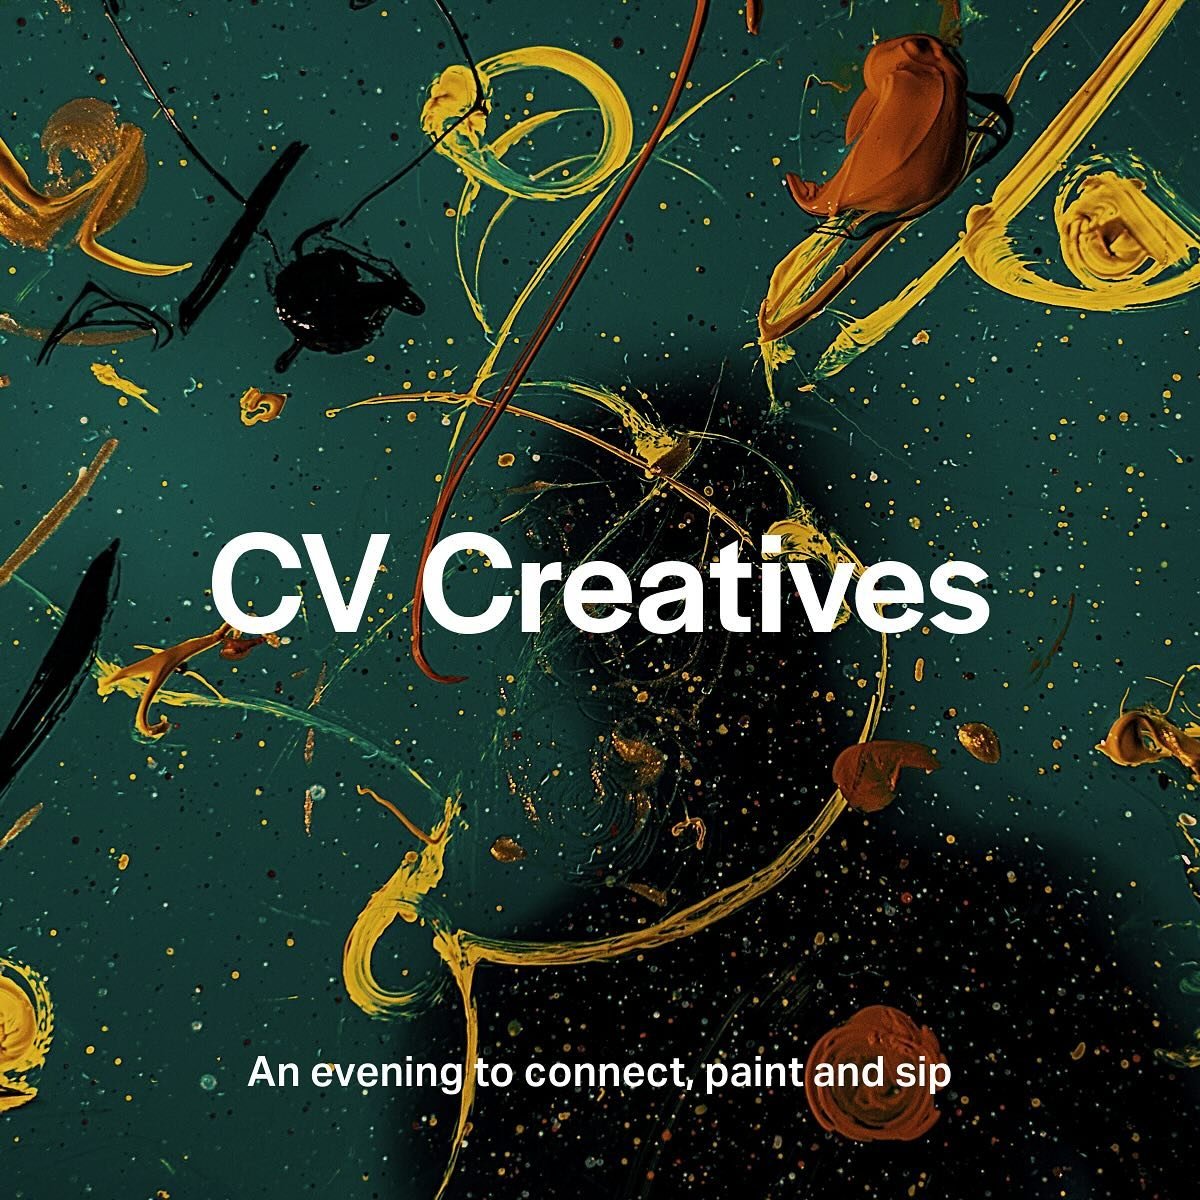 CV Creatives is a group for our artists and makers to connect together in the pursuit of further imagining and implementing their creativity. There are some great events and occasions coming up for you to connect!

Our next event is a CV Creative Eve